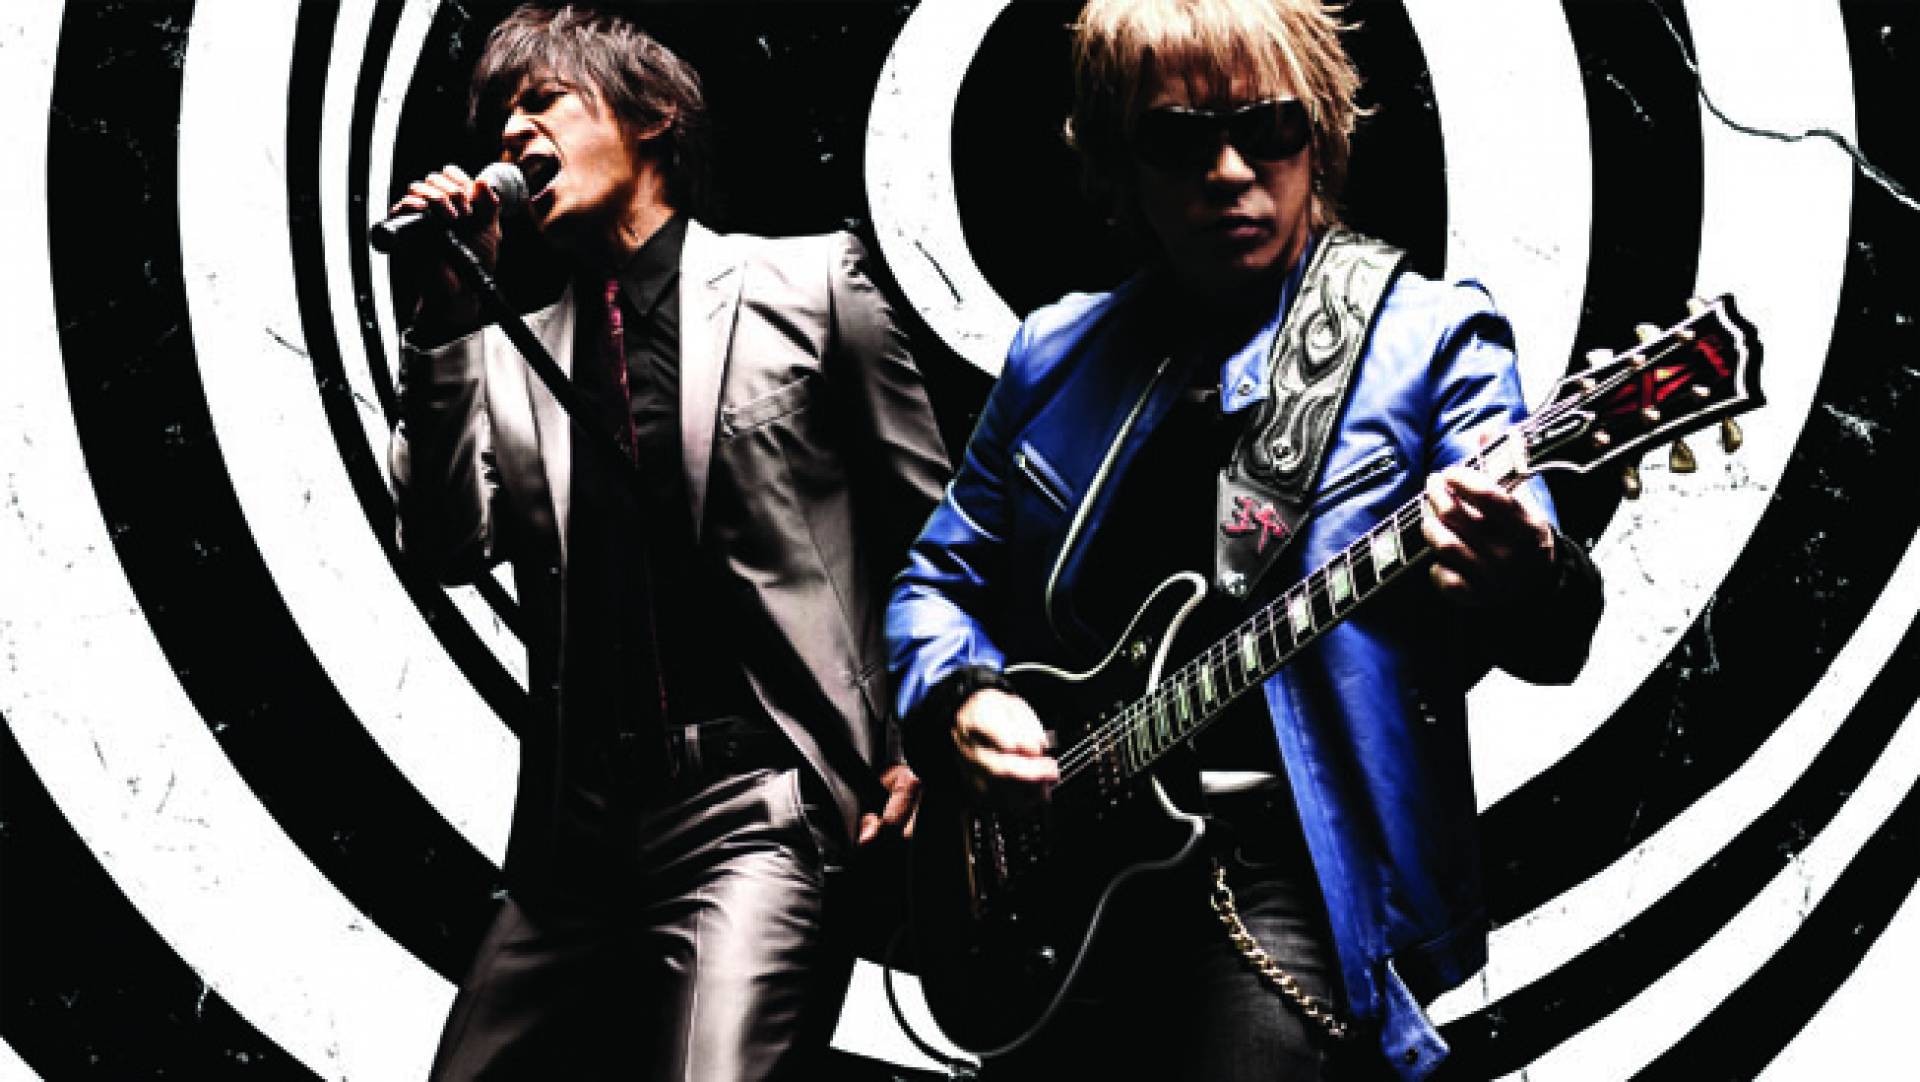 Interview with B'z